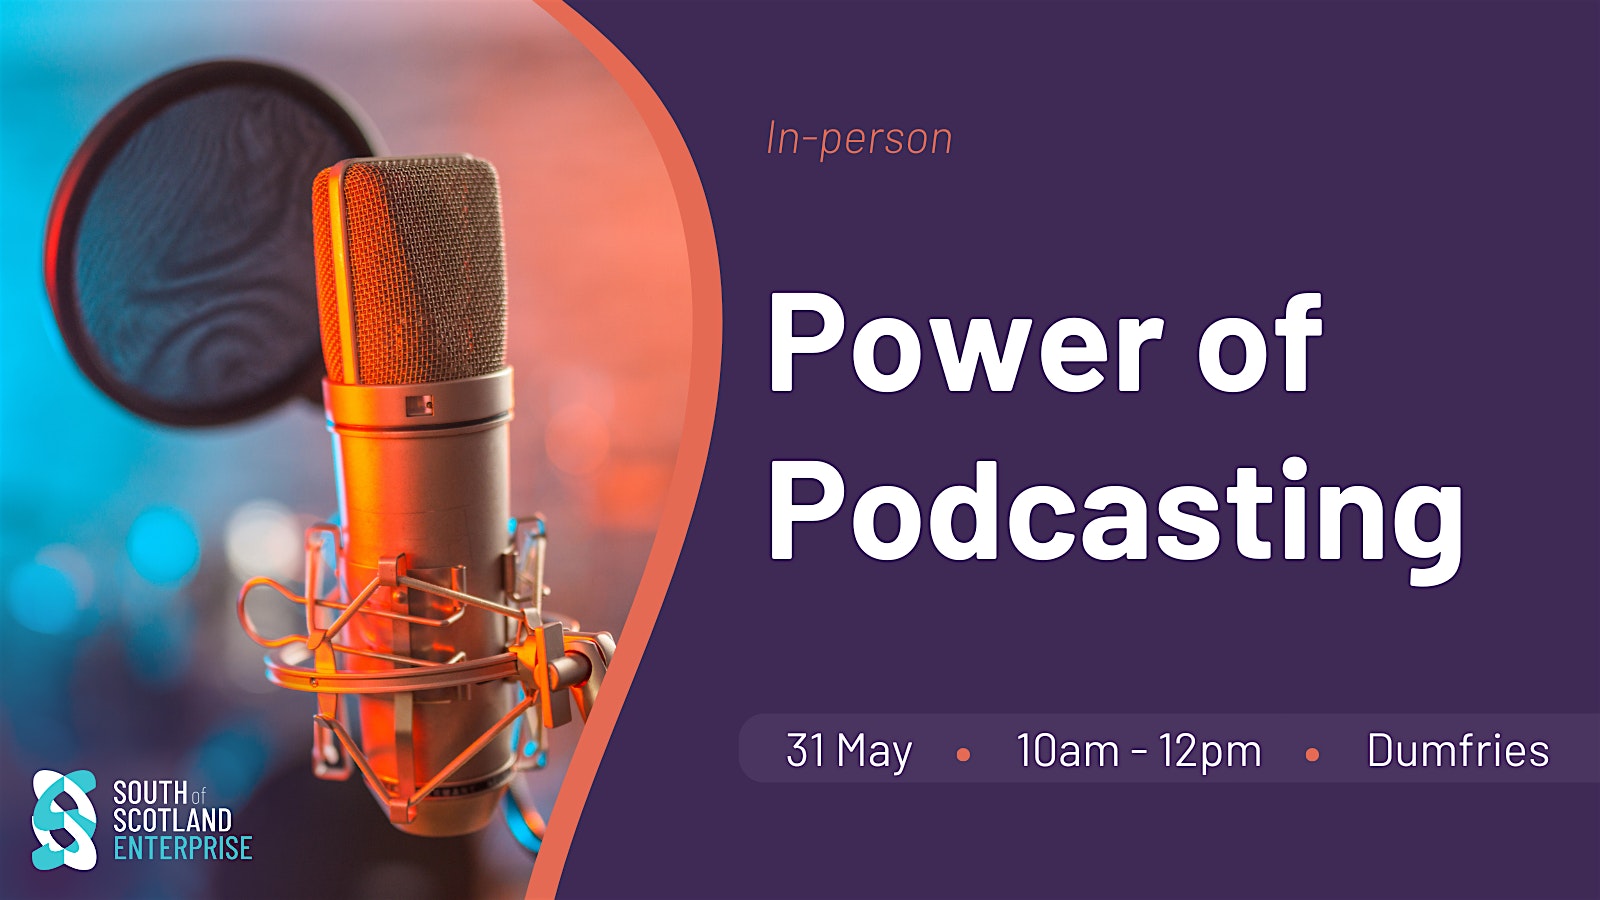 Power of Podcasting - Dumfries image